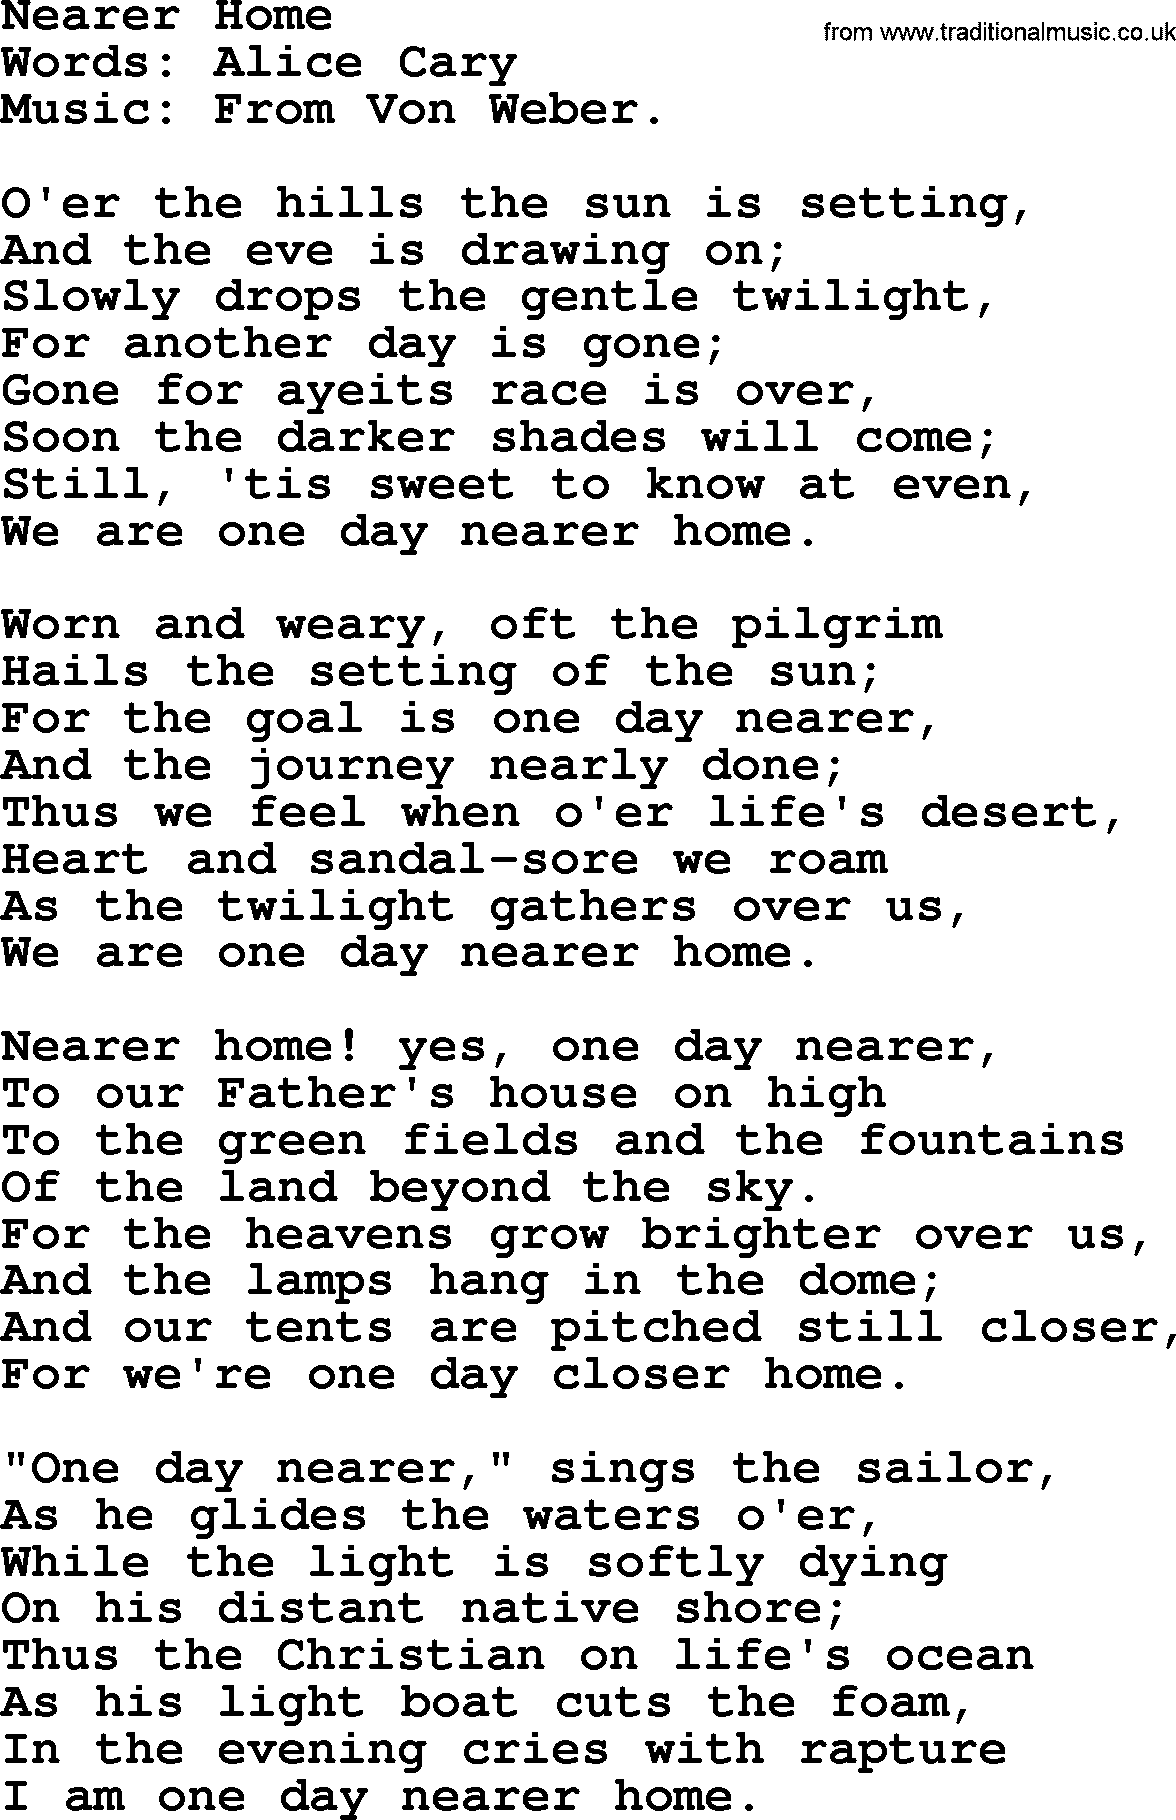 Songs and Hymns about Heaven: Nearer Home lyrics with PDF